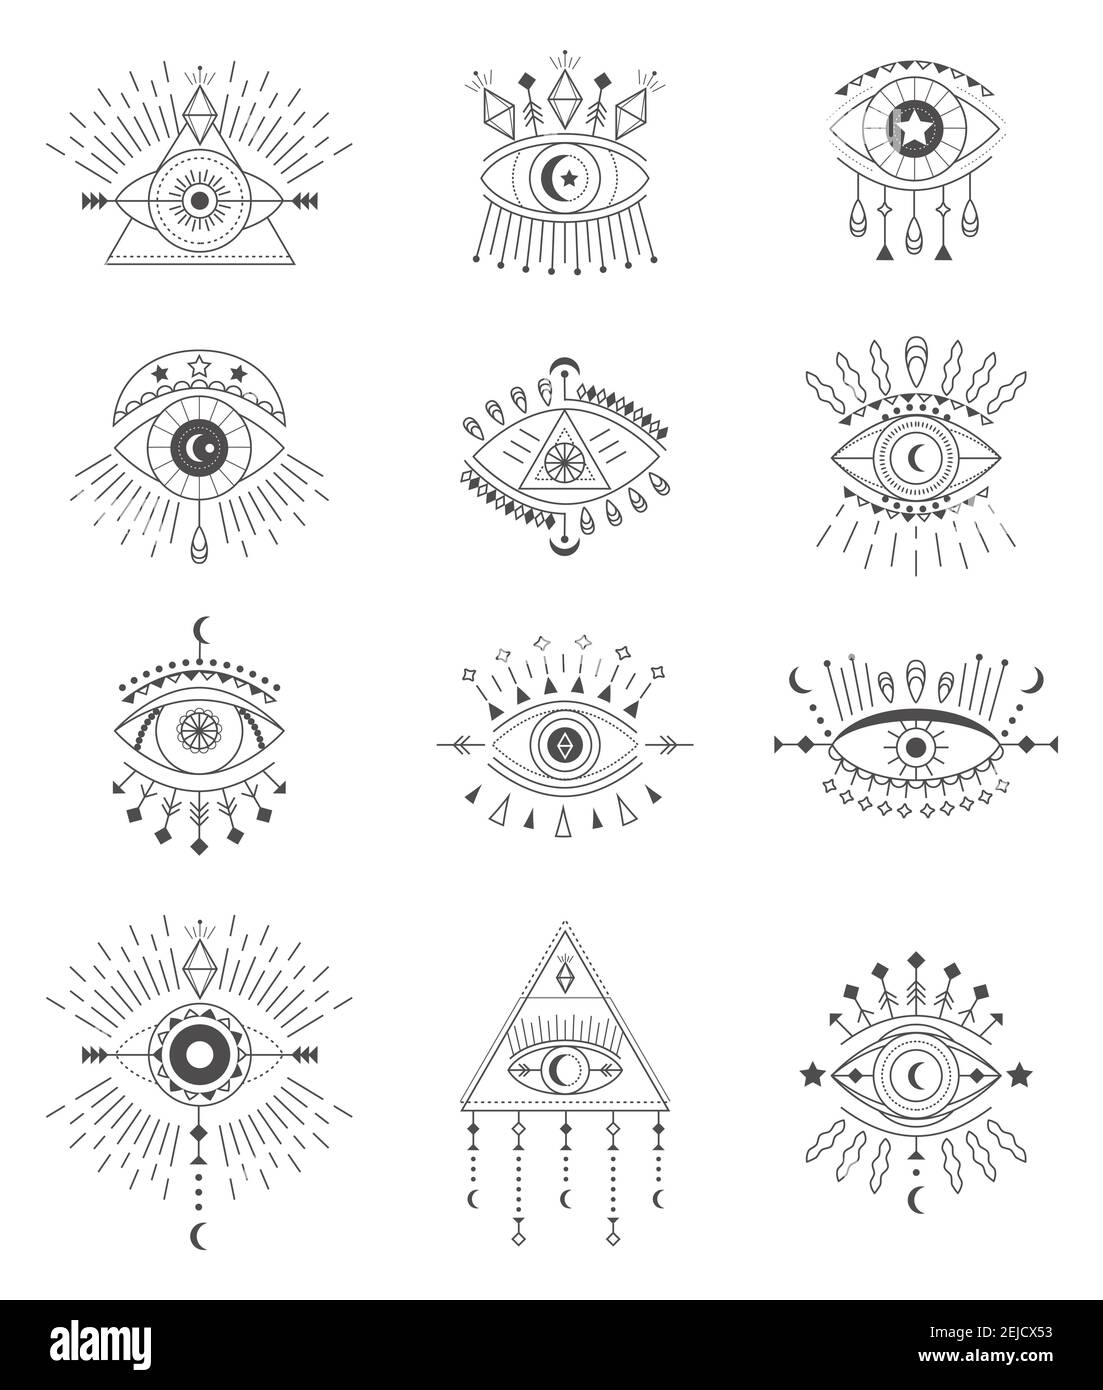 101 Best Small Evil Eye Tattoo Ideas That Will Blow Your Mind  Outsons